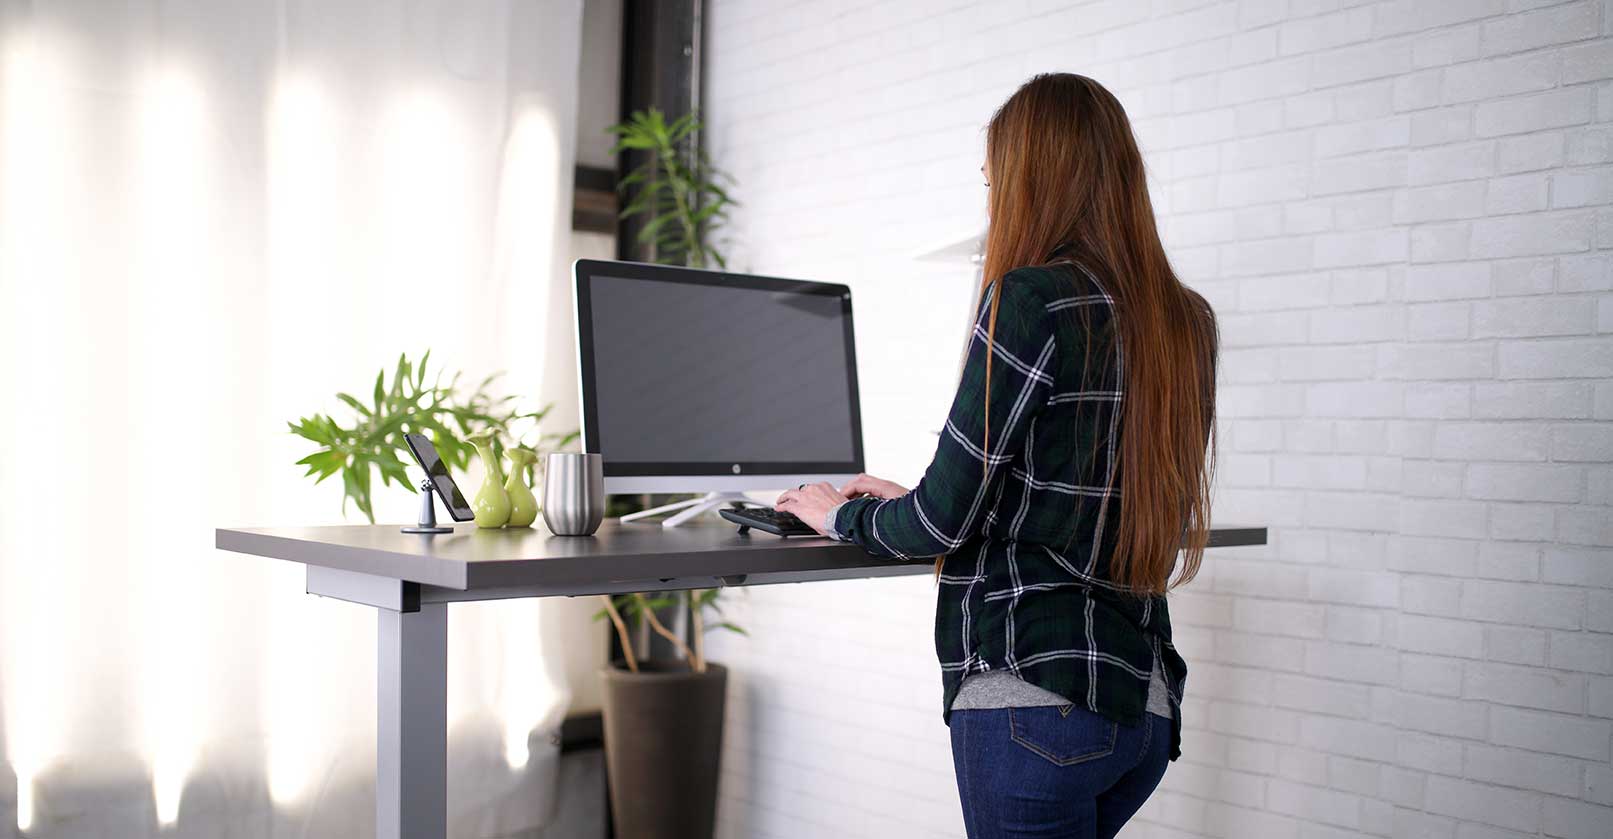 Standing Desks for ADHD - The Standing Desk